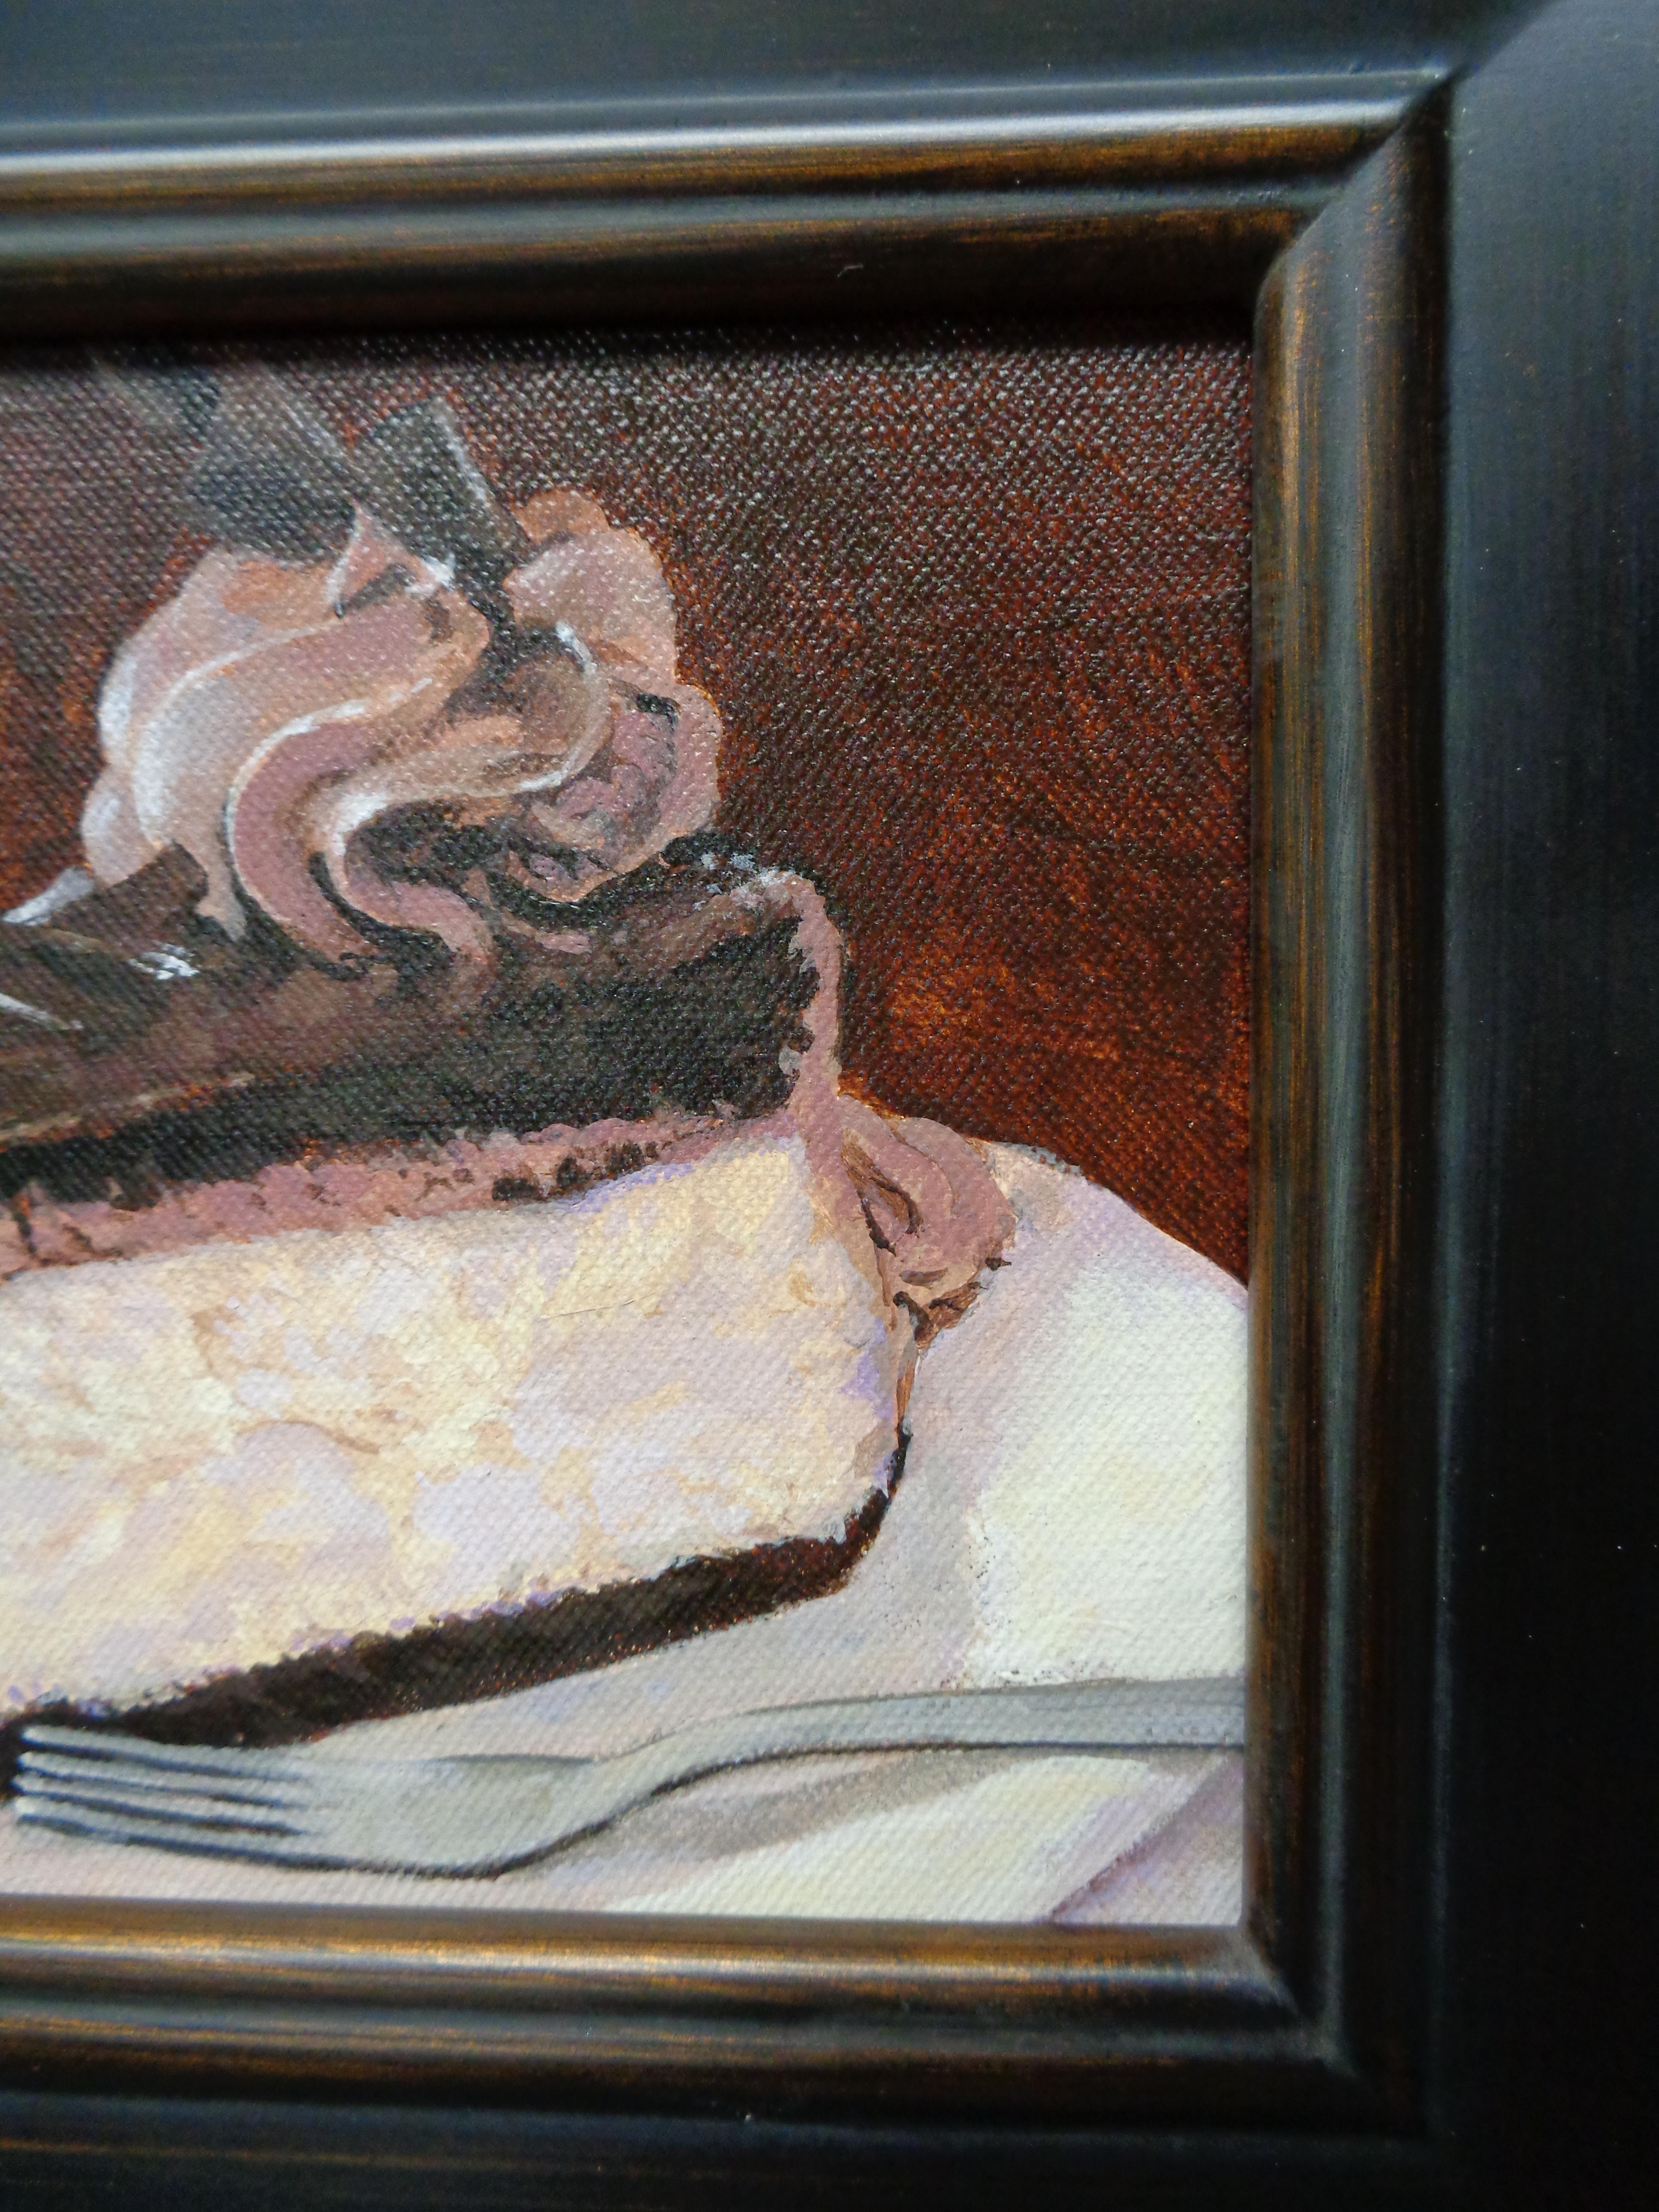 An acrylic painting on canvas by award winning contemporary artist Michael Budden that showcases a chocolate cheesecake. Image is 6 x 8 unframed.
ARTIST'S STATEMENT
I have been in the art business as an artist and dealer since the early 80's. Almost